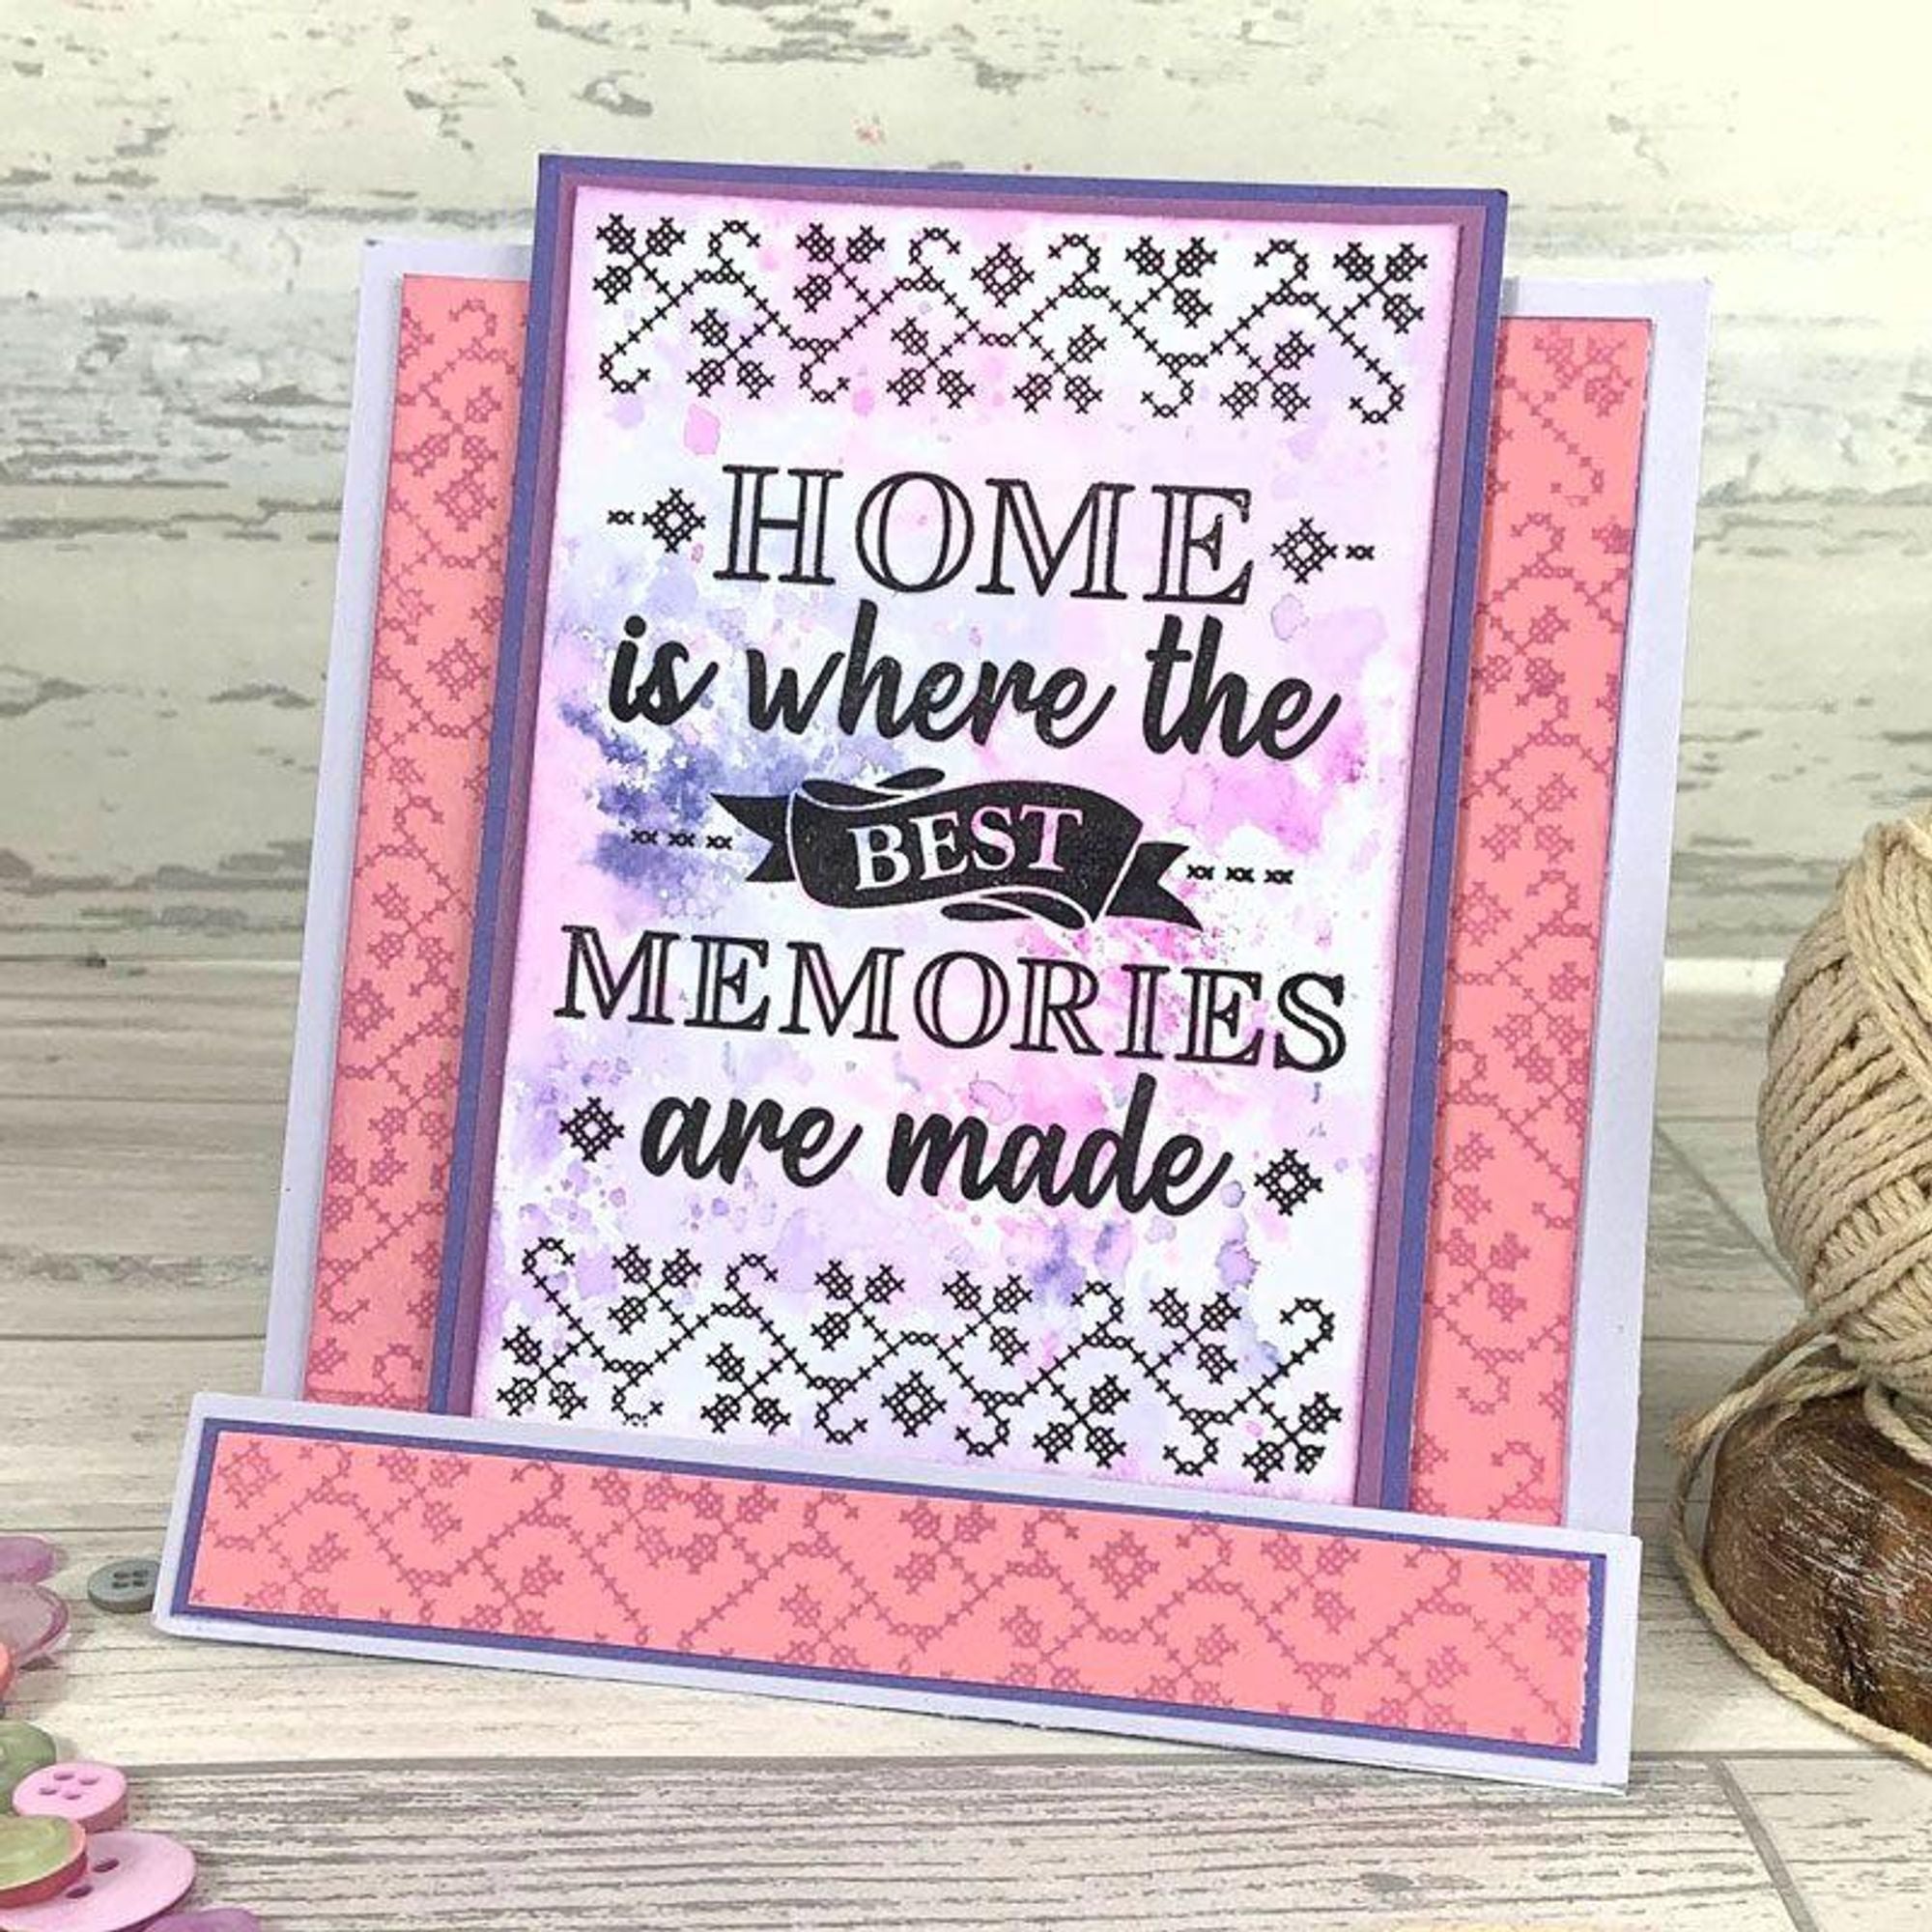 For the Love of Stamps - Memories at Home A6 Stamp Set